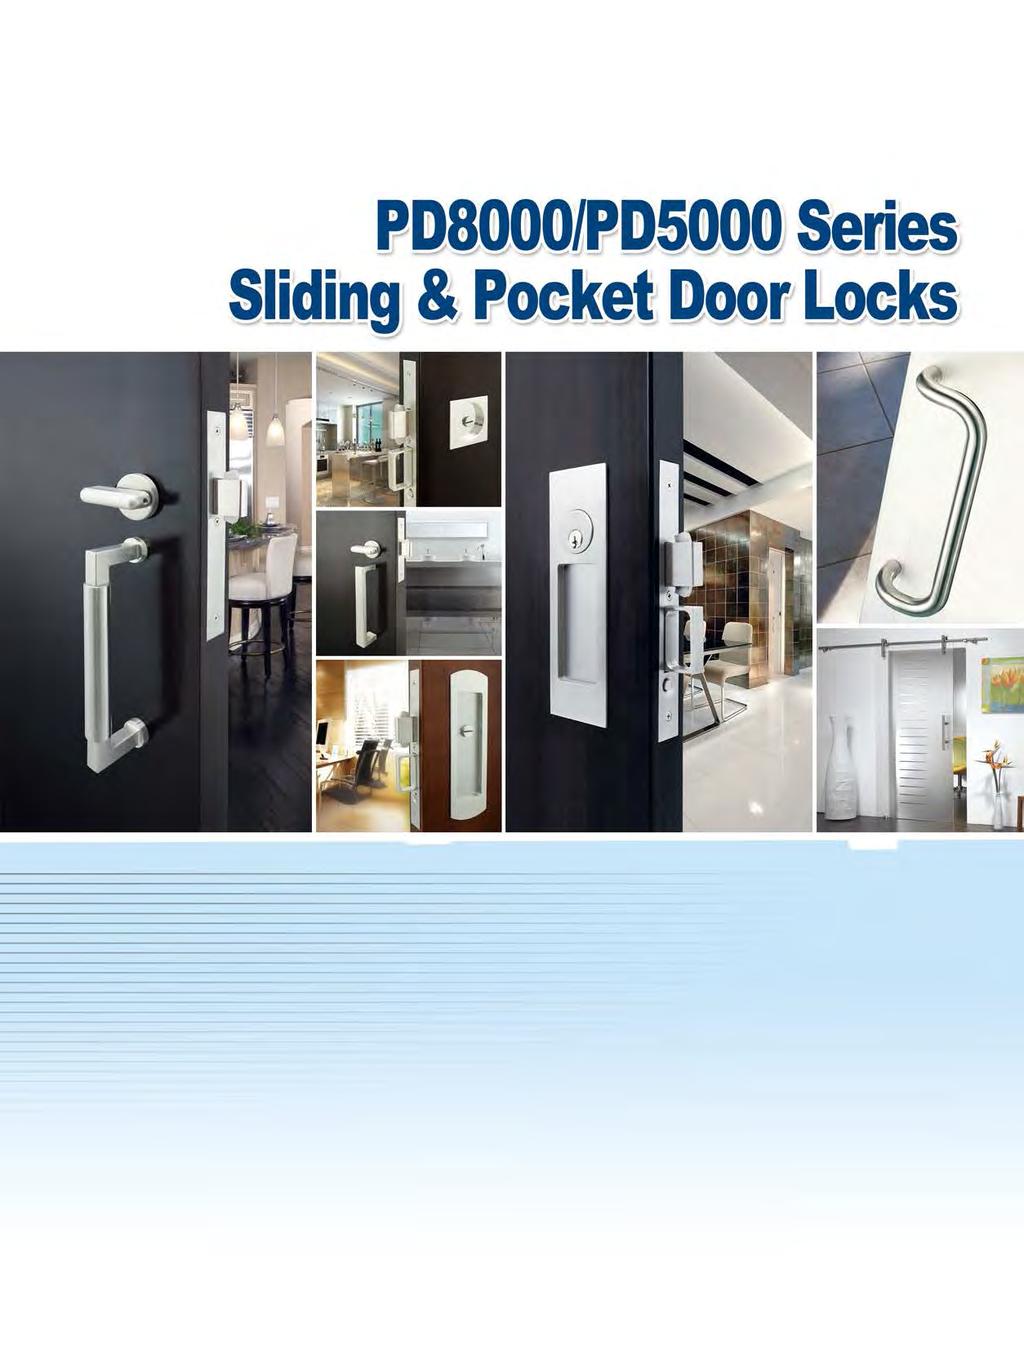 (Edition 3) PD8000/PD5000 Series NEW RELEASE SUMMER 2016